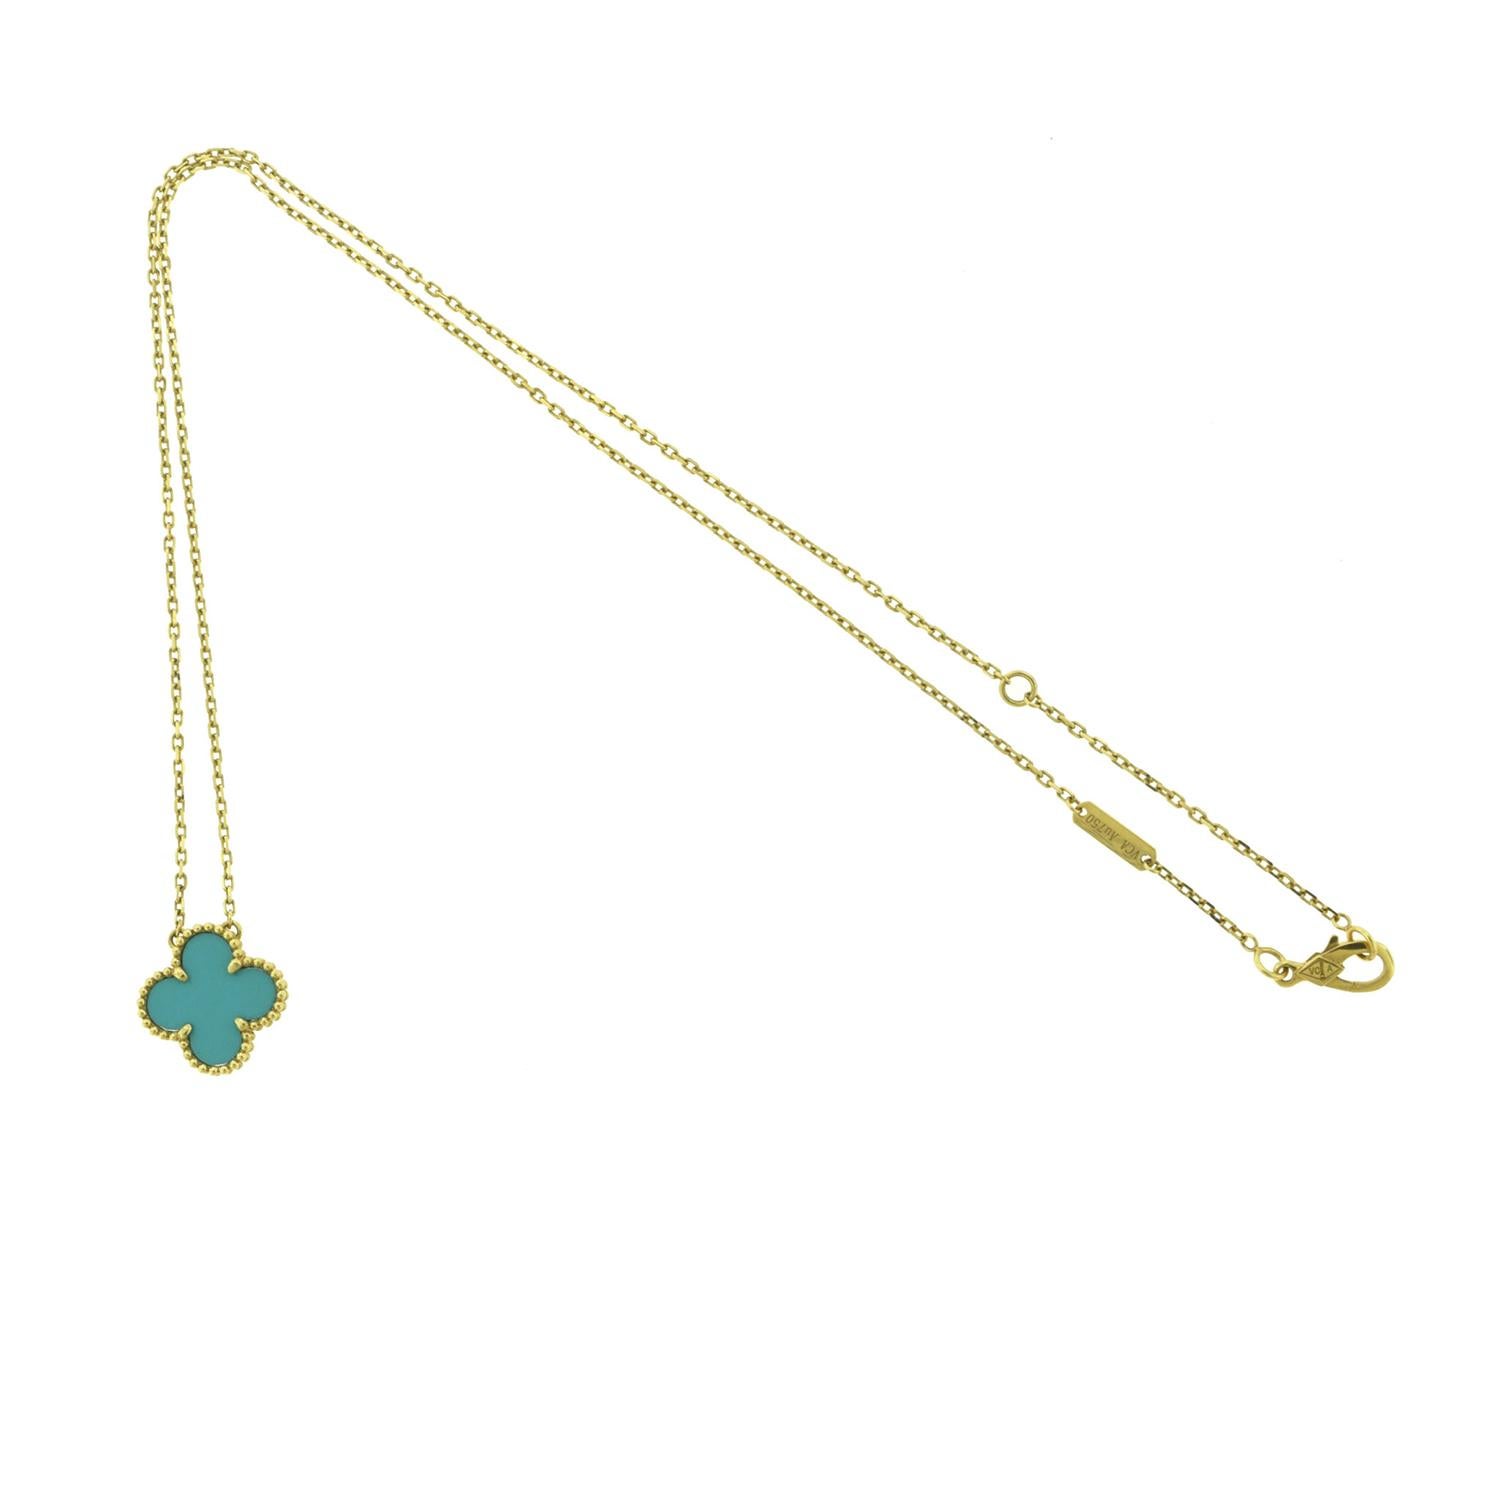 Designer:  Van Cleef & Arpels 

Collection:  Vintage Alhambra

Style:  1  Motif Necklace

Metal Type: Yellow Gold 

Metal Purity: 18k

Stone:  Rare Turquoise 

Pendant Size : Medium

Total Item  Weight(Grams): XX

Hallmarks: VCA; Serial #; AU750